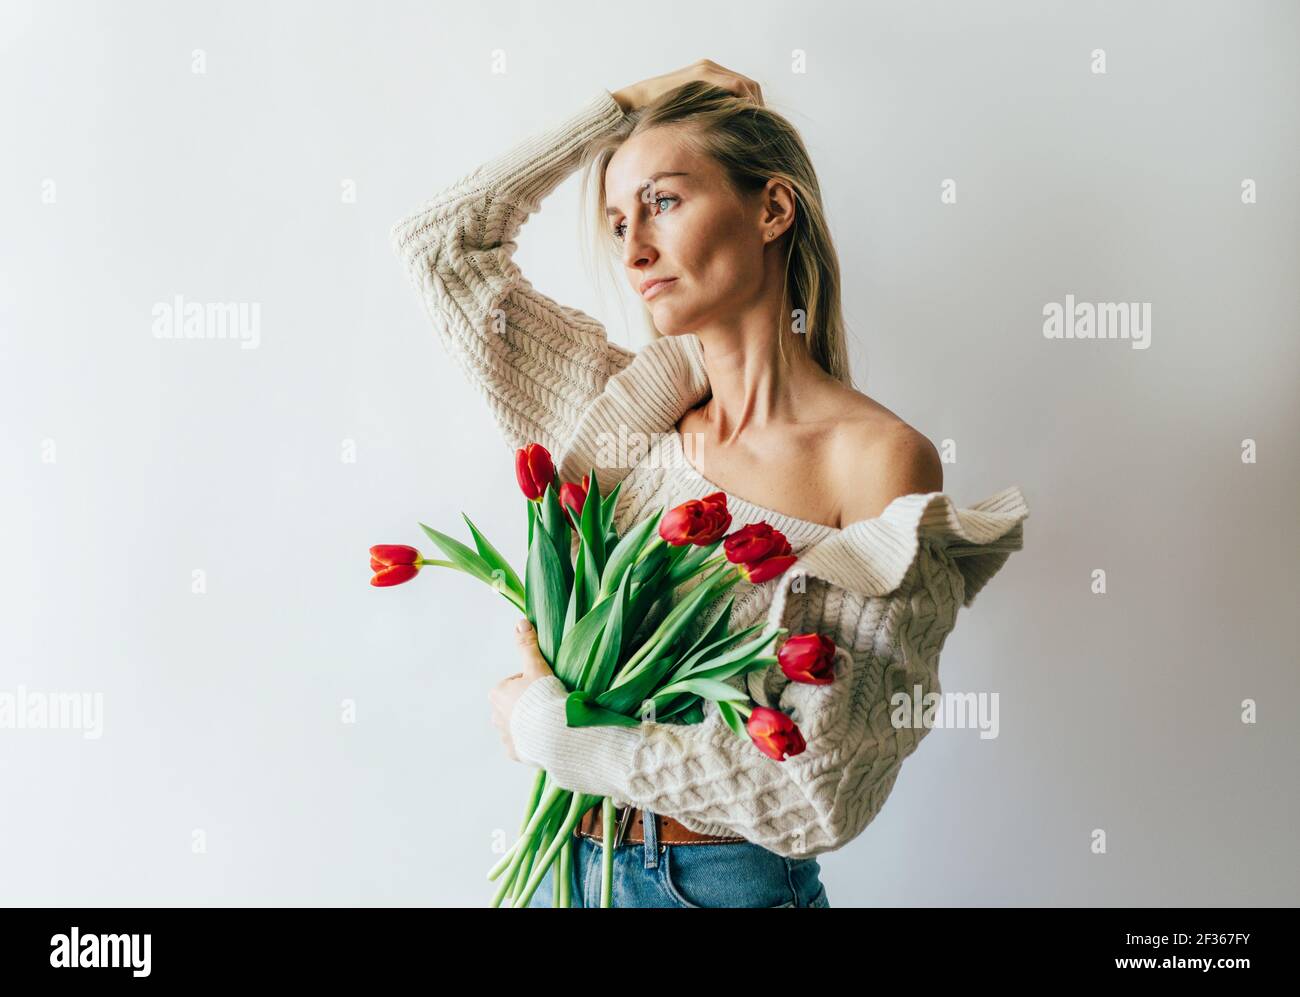 Young pretty confident emancipated woman with a bouquet of tulips against a white wall background. Stock Photo